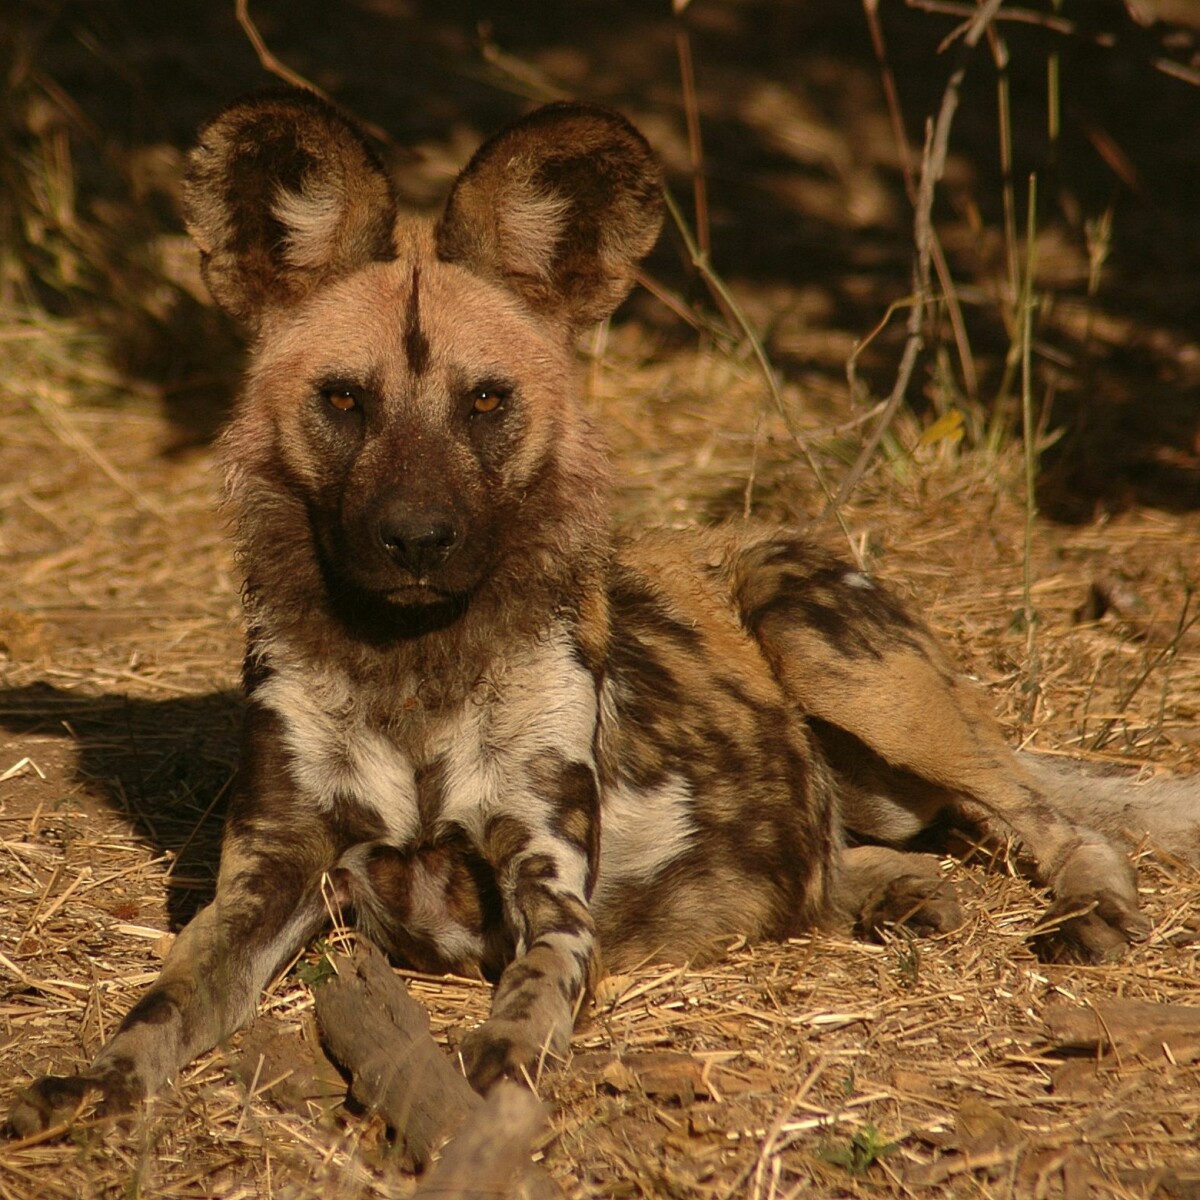 Scientist wants to save the African wild dog – with urine